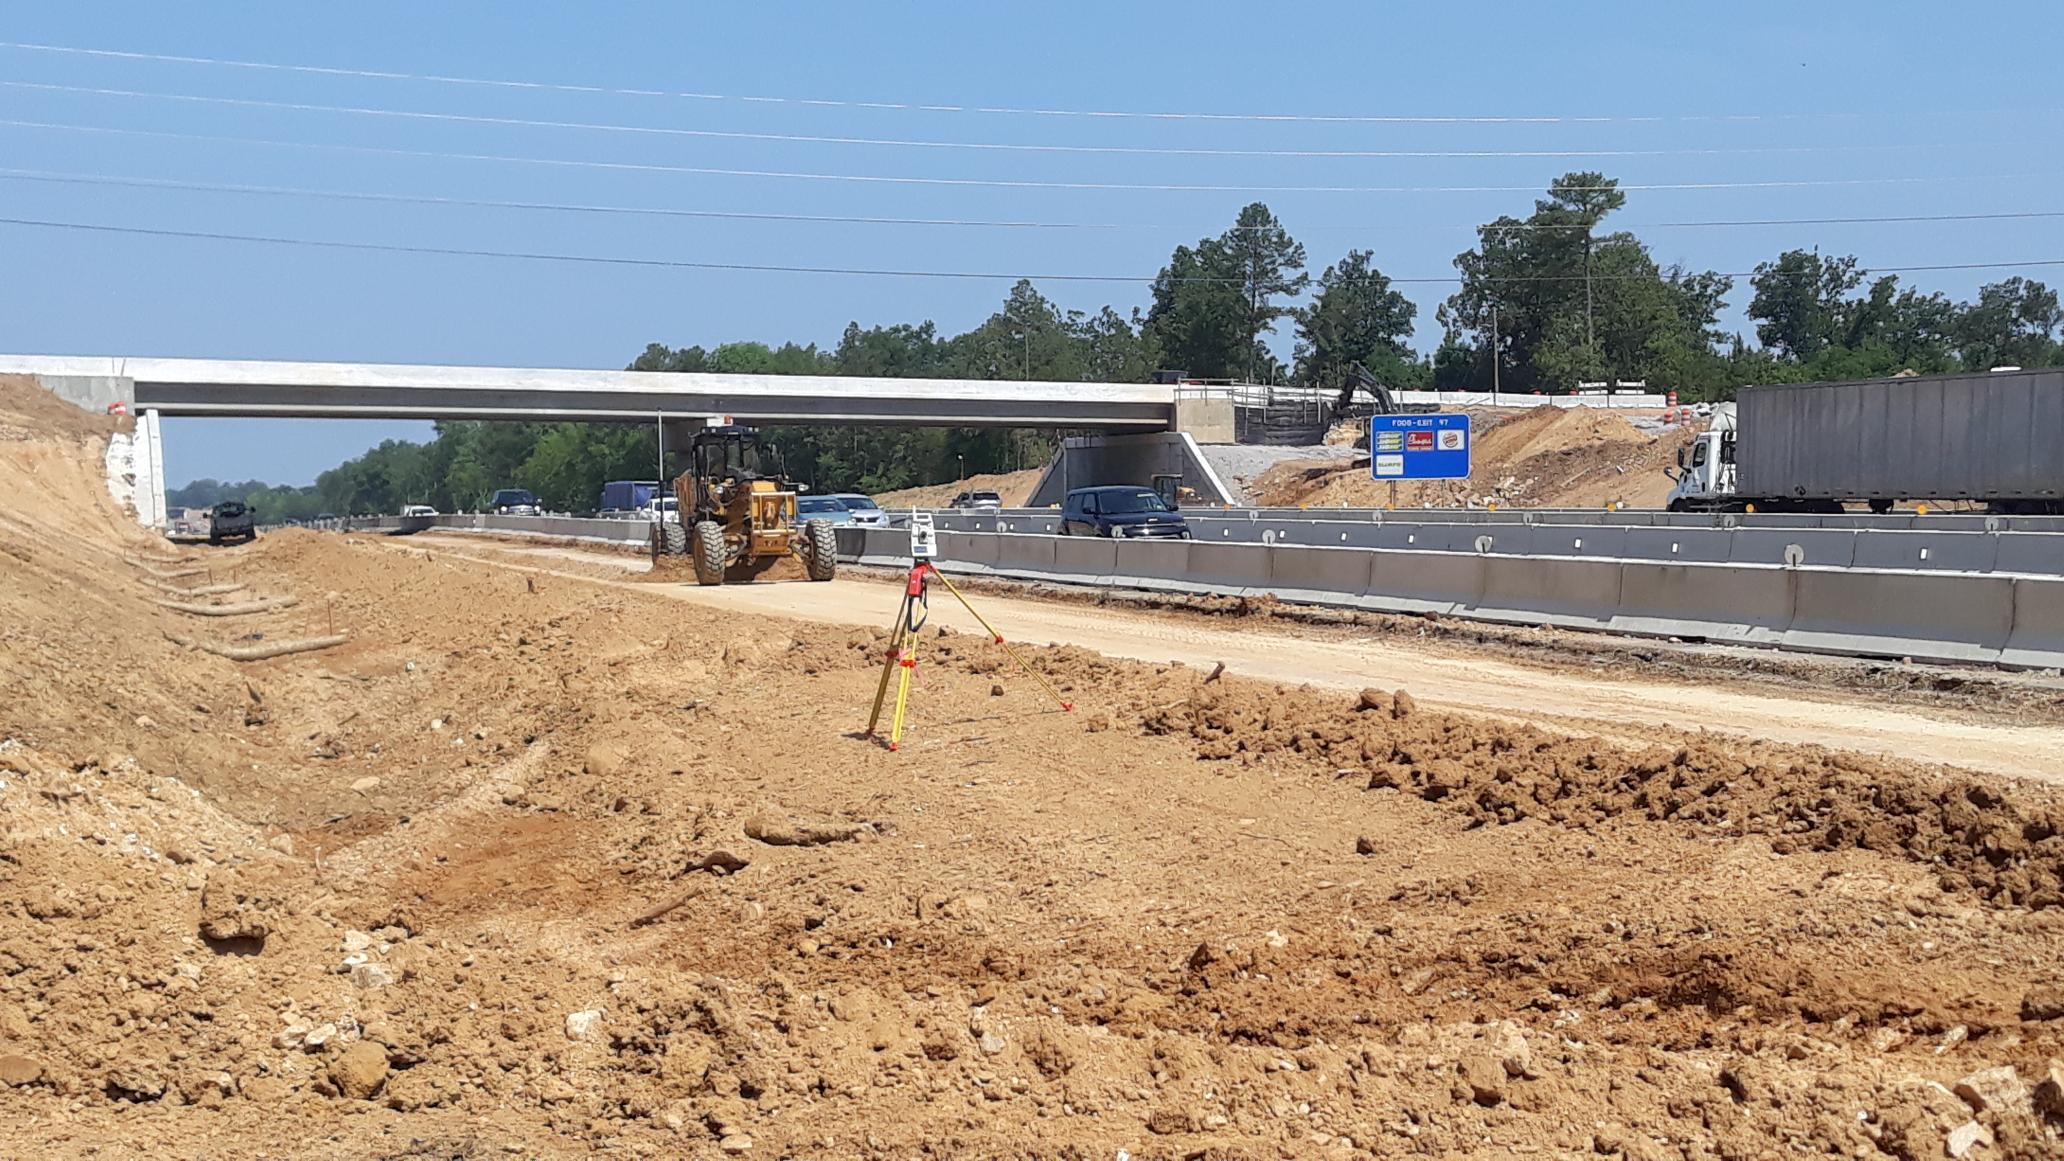 In this photo, the contractor utilizes state of the art surveying equipment to automate the fine grading operation along I-26 near Shady Grove Road.